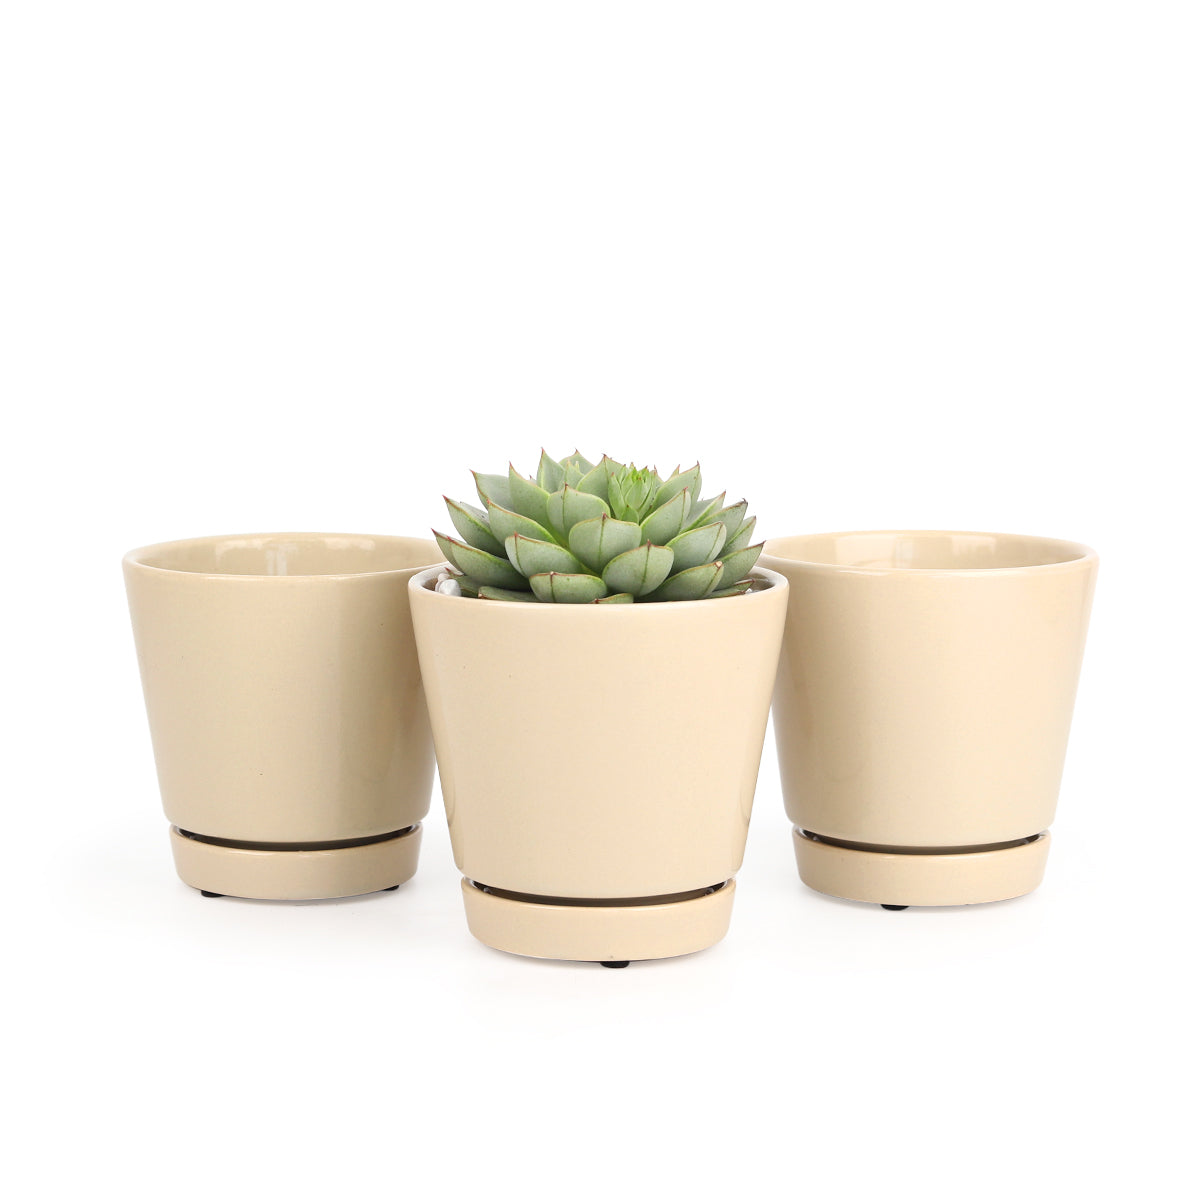 Oatmeal color pot pack, modern pot for houseplants and succulents, minimalist pot with drainage hole and saucer